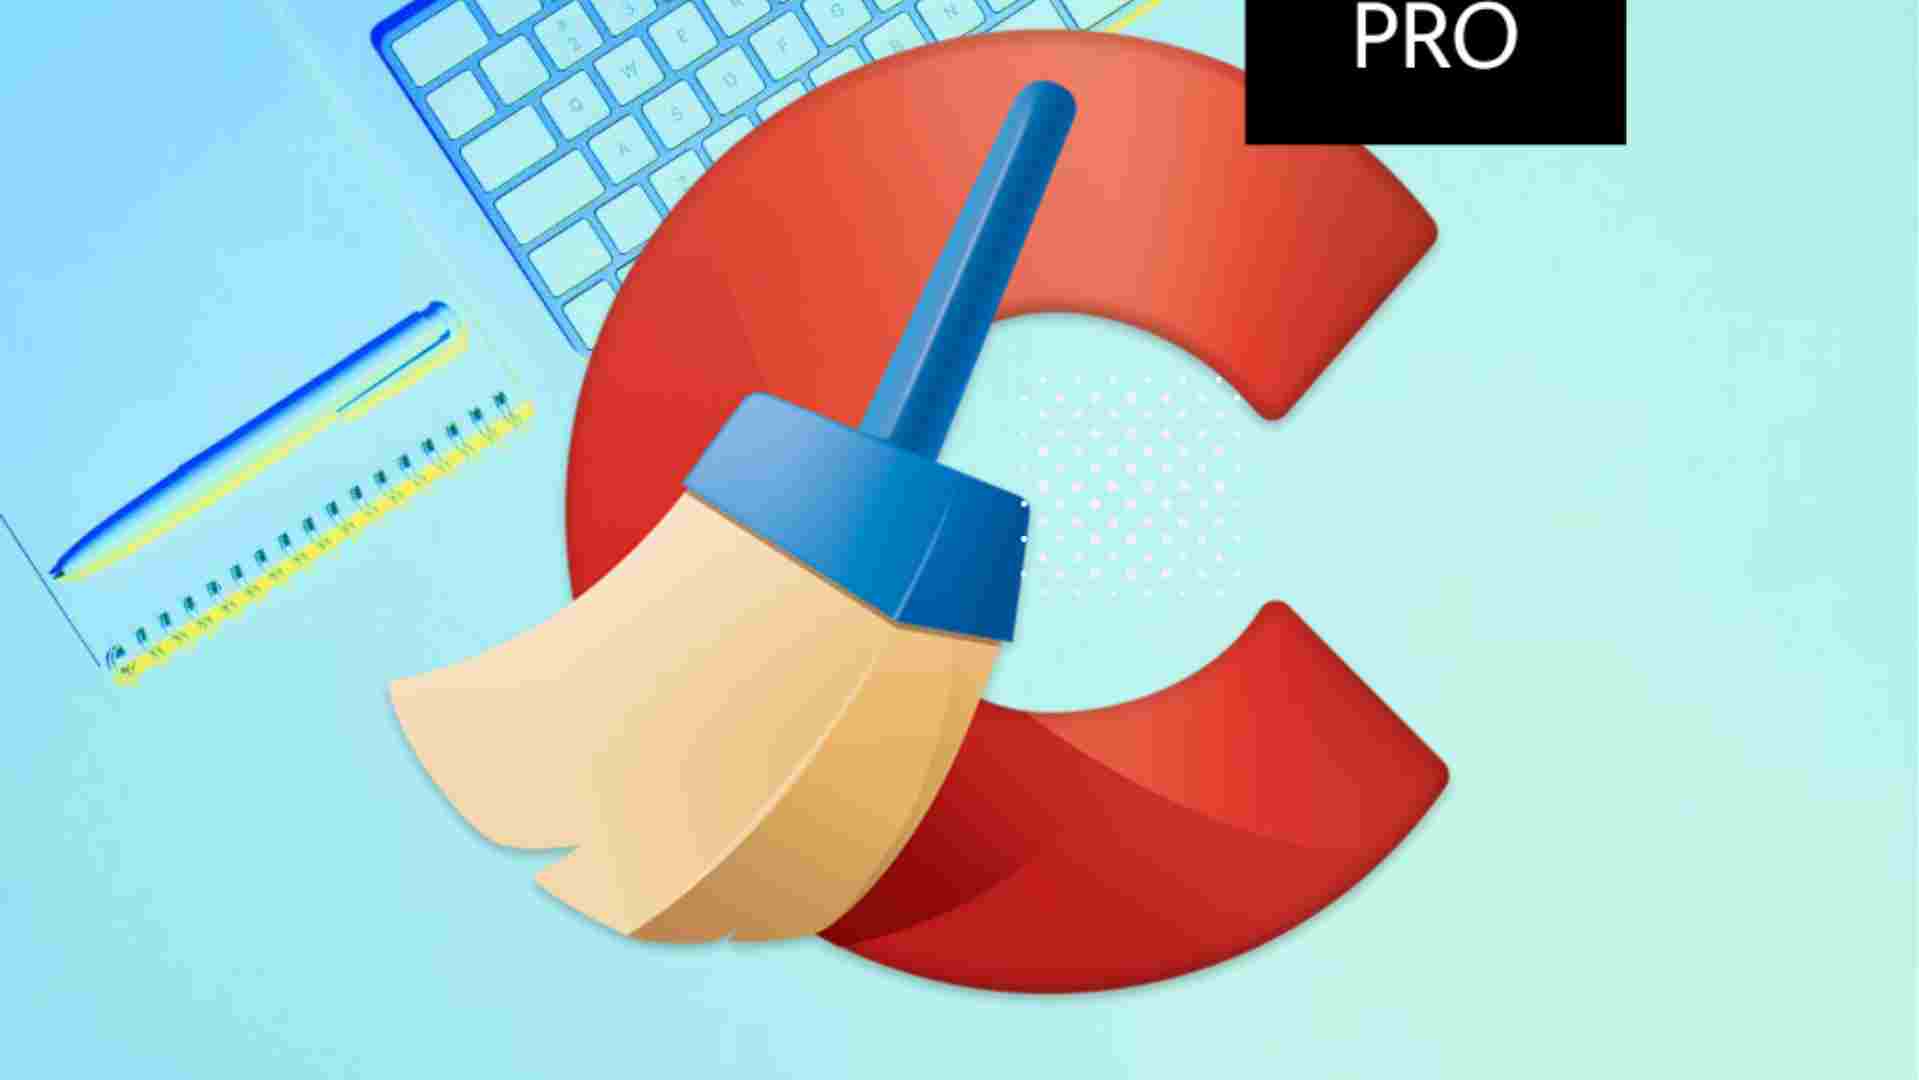 ccleaner downloas